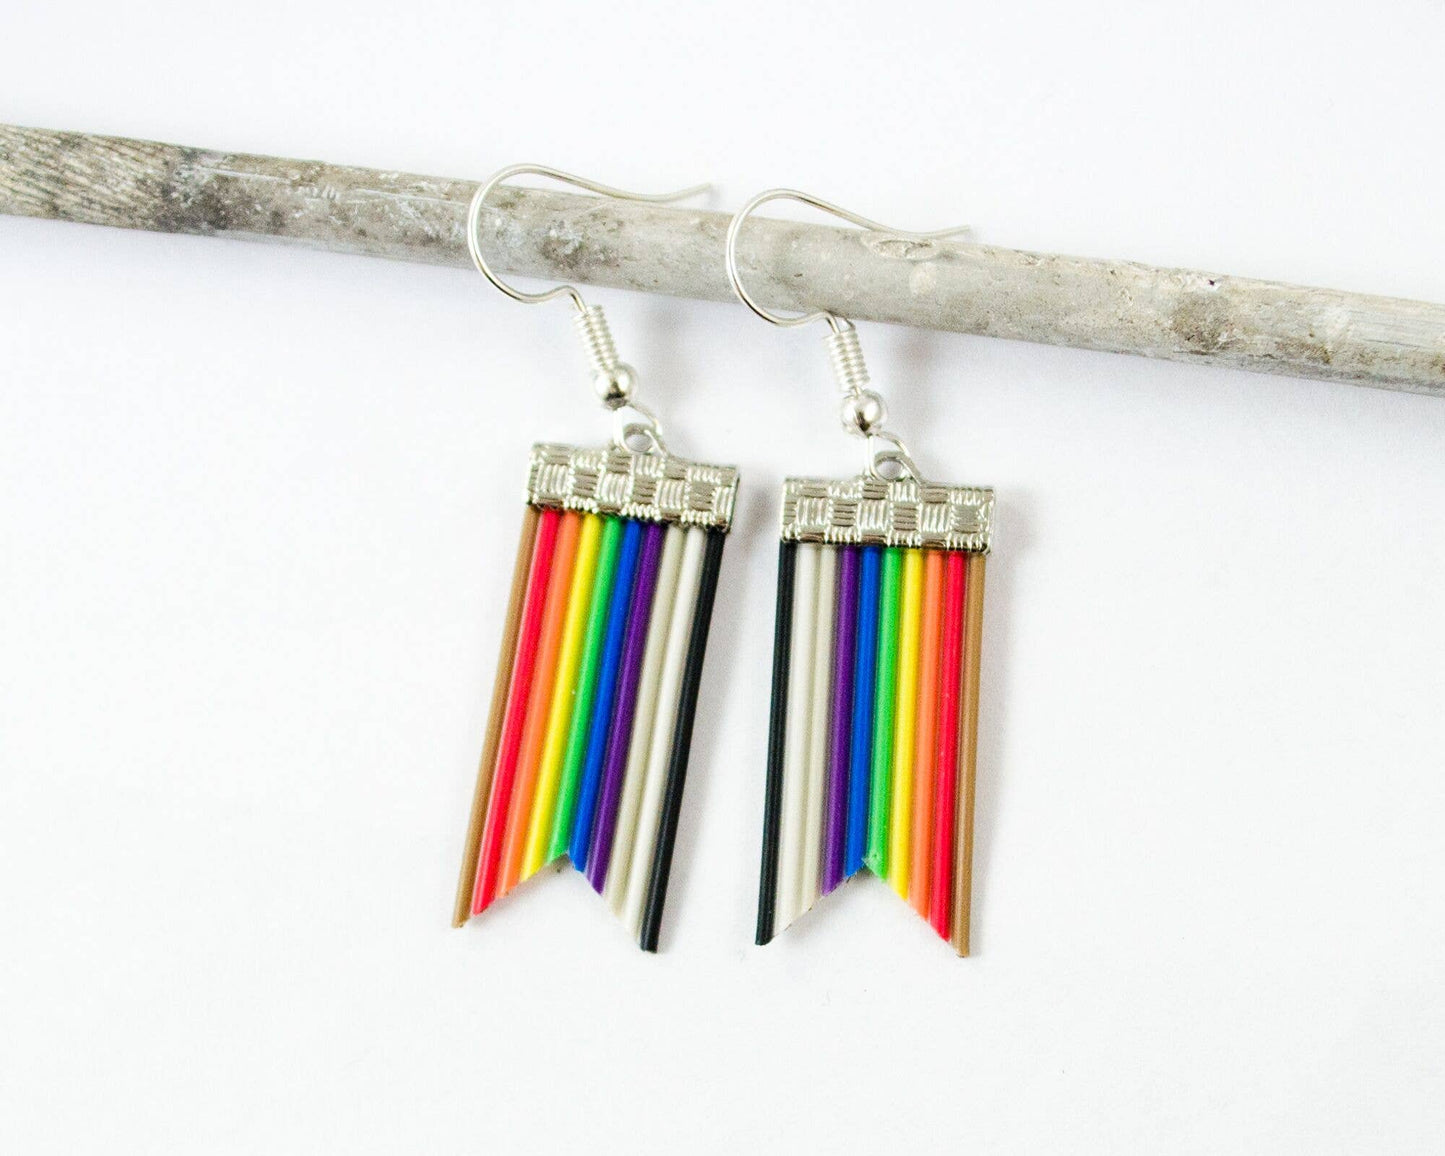 Rainbow banner-shaped earrings have been made into earrings and hang on a display